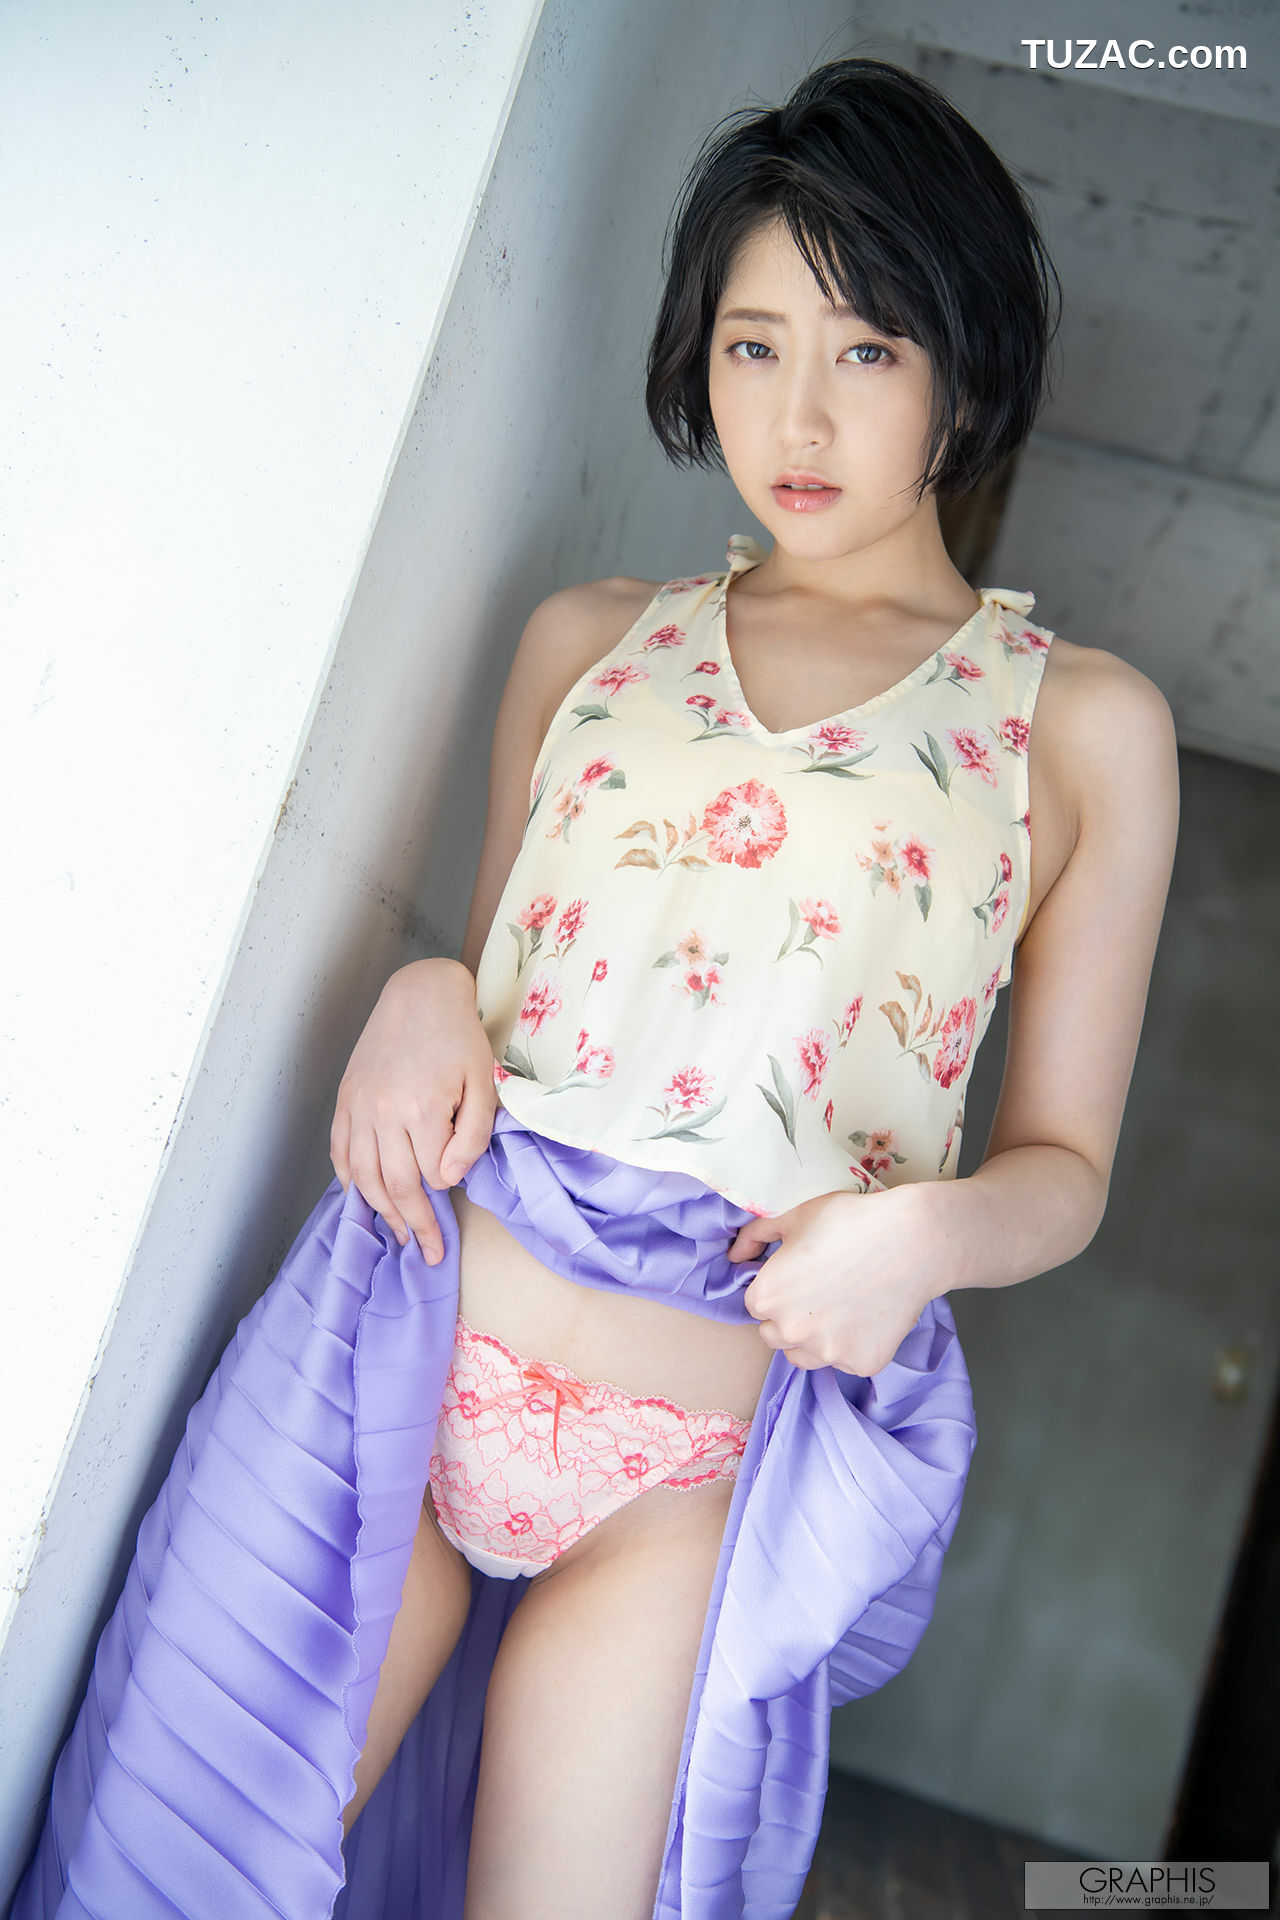 Graphis_ Gals474 夏目響 - Sounds cute!![54P]